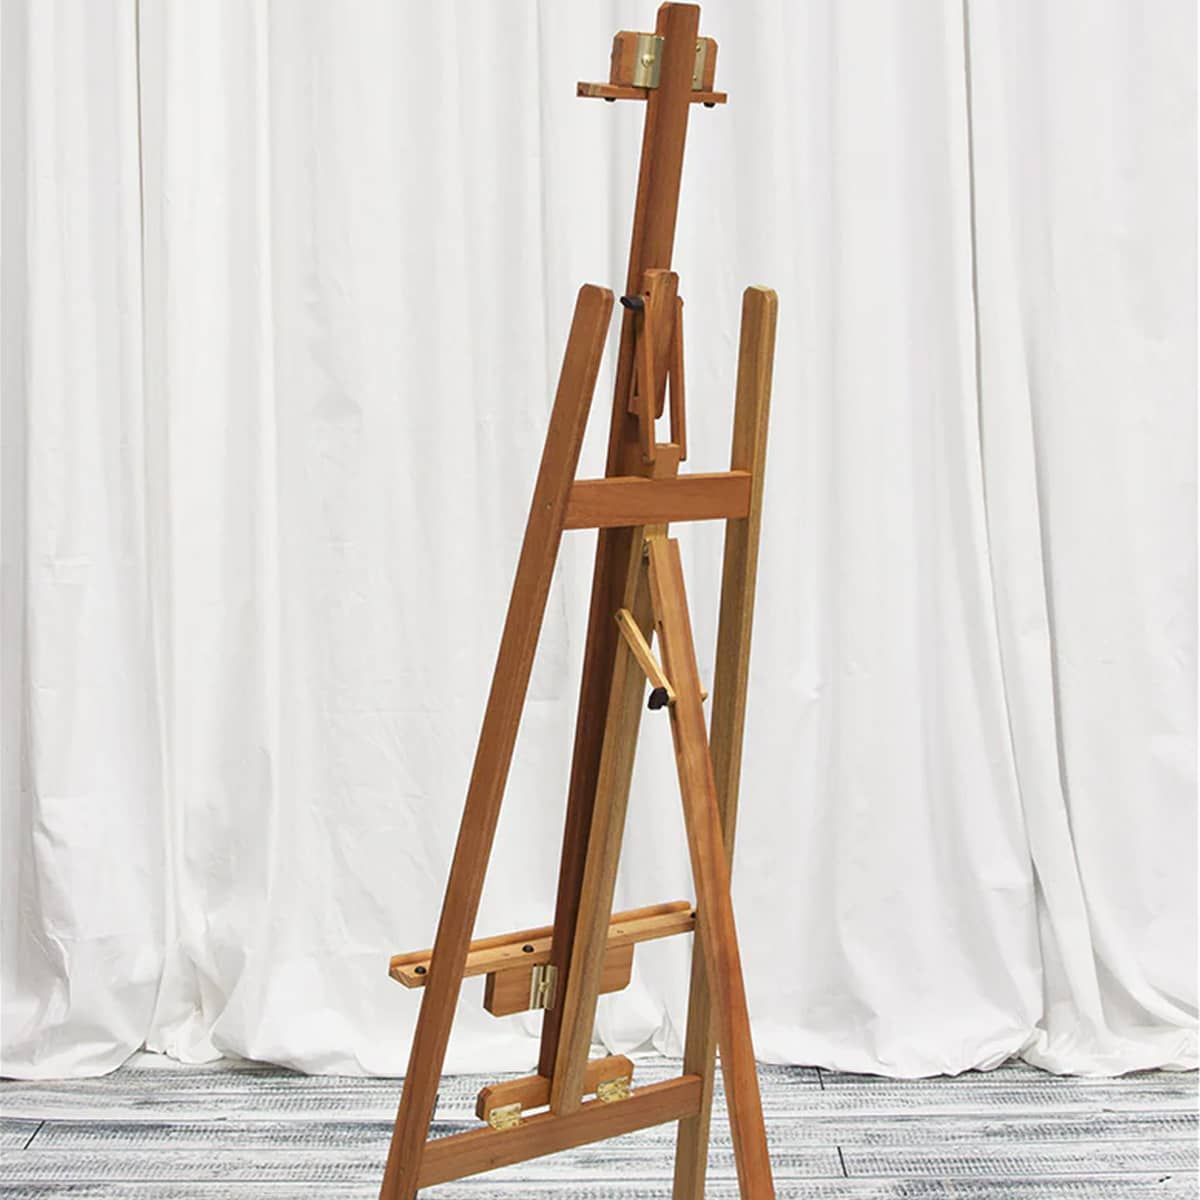 An adjustable A-frame easel with a canvas holder that adjusts on the center mast